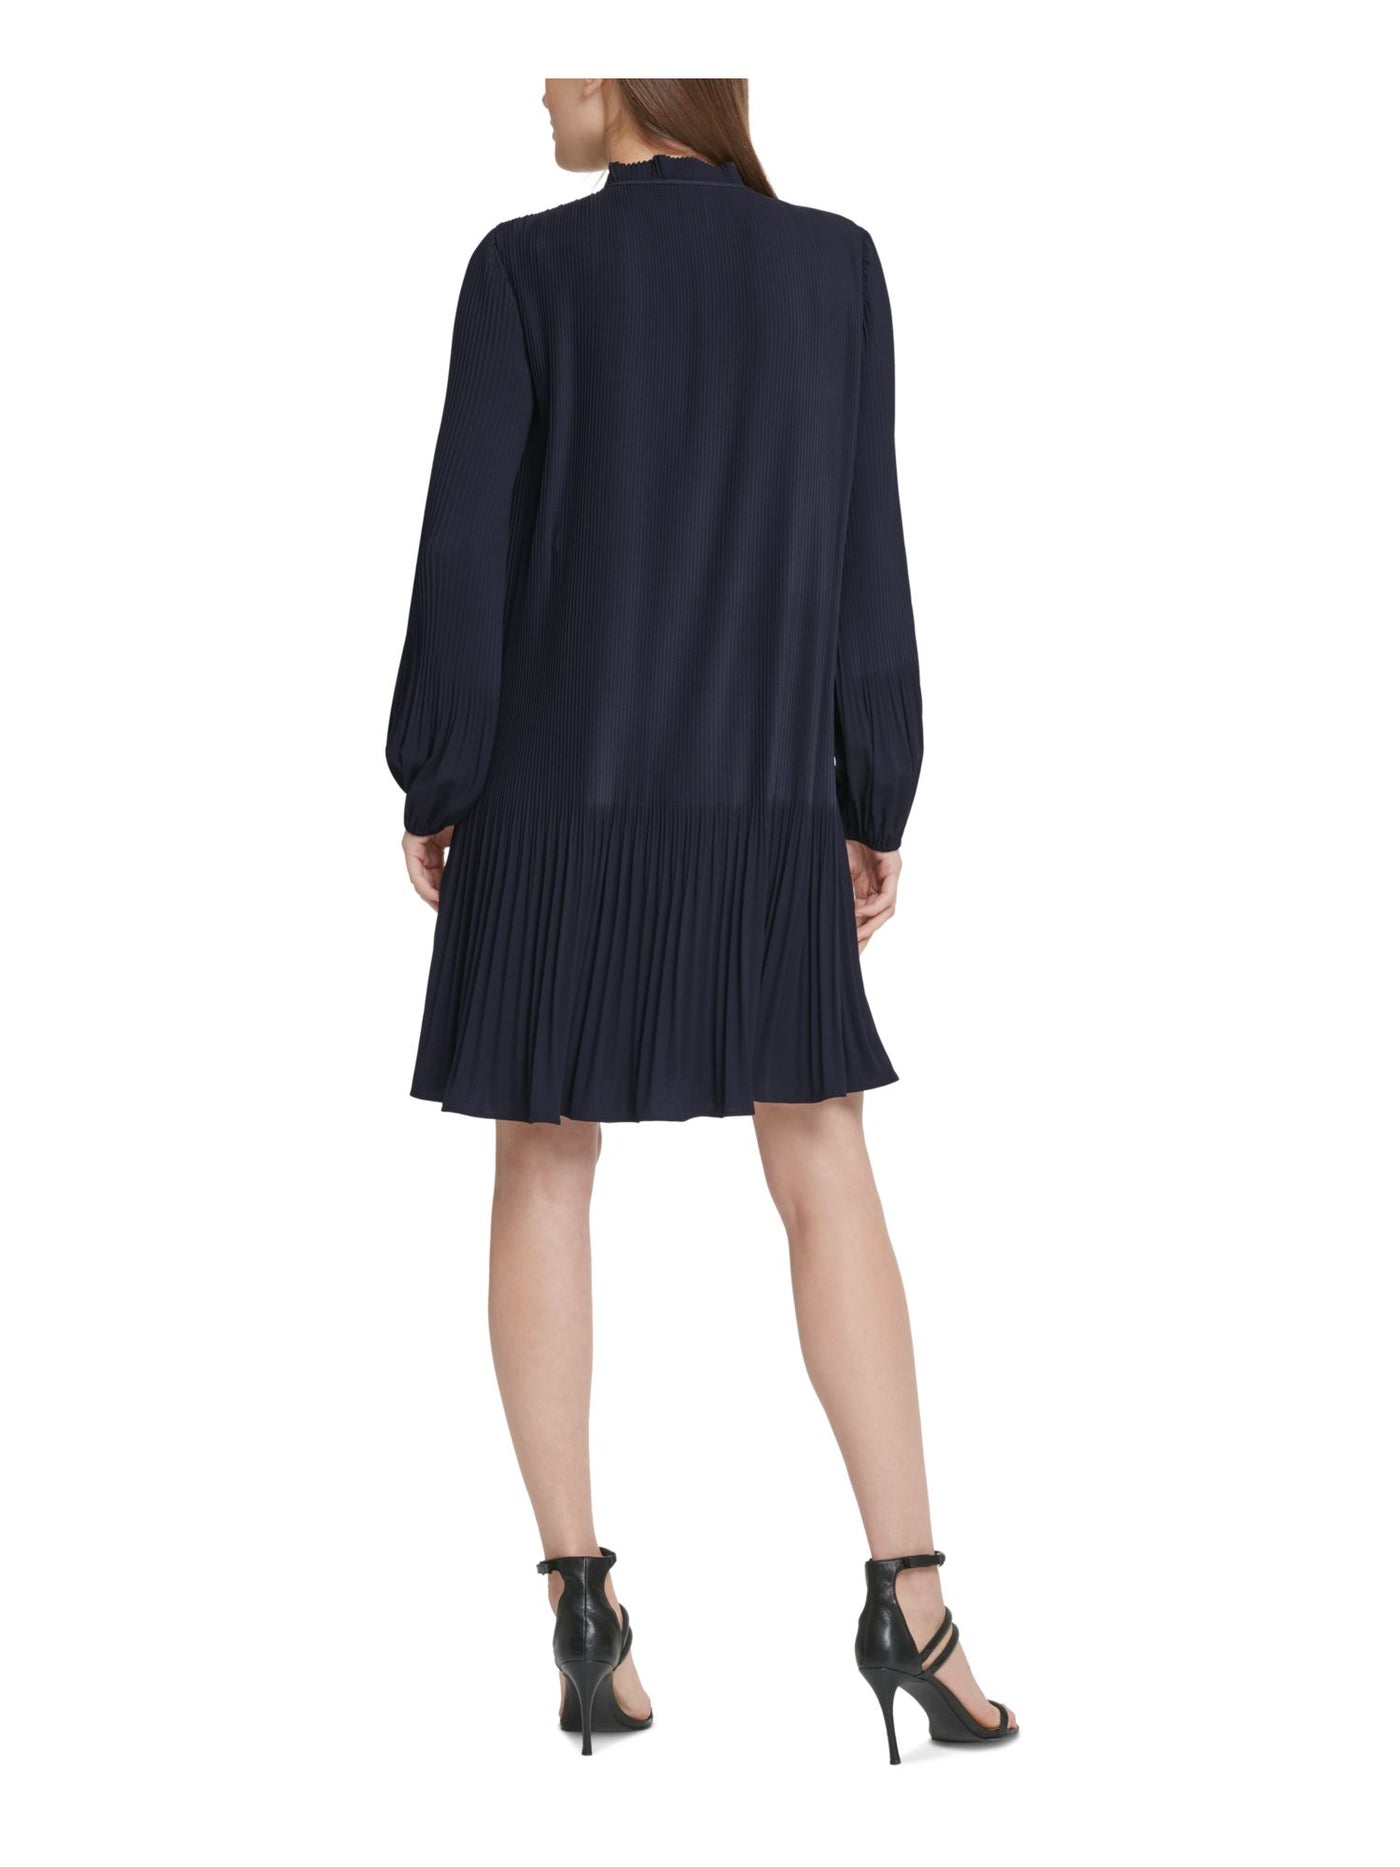 DKNY Womens Navy Tie Pleated Pullover Lined Long Sleeve Split Above The Knee Wear To Work Shift Dress Petites 8P